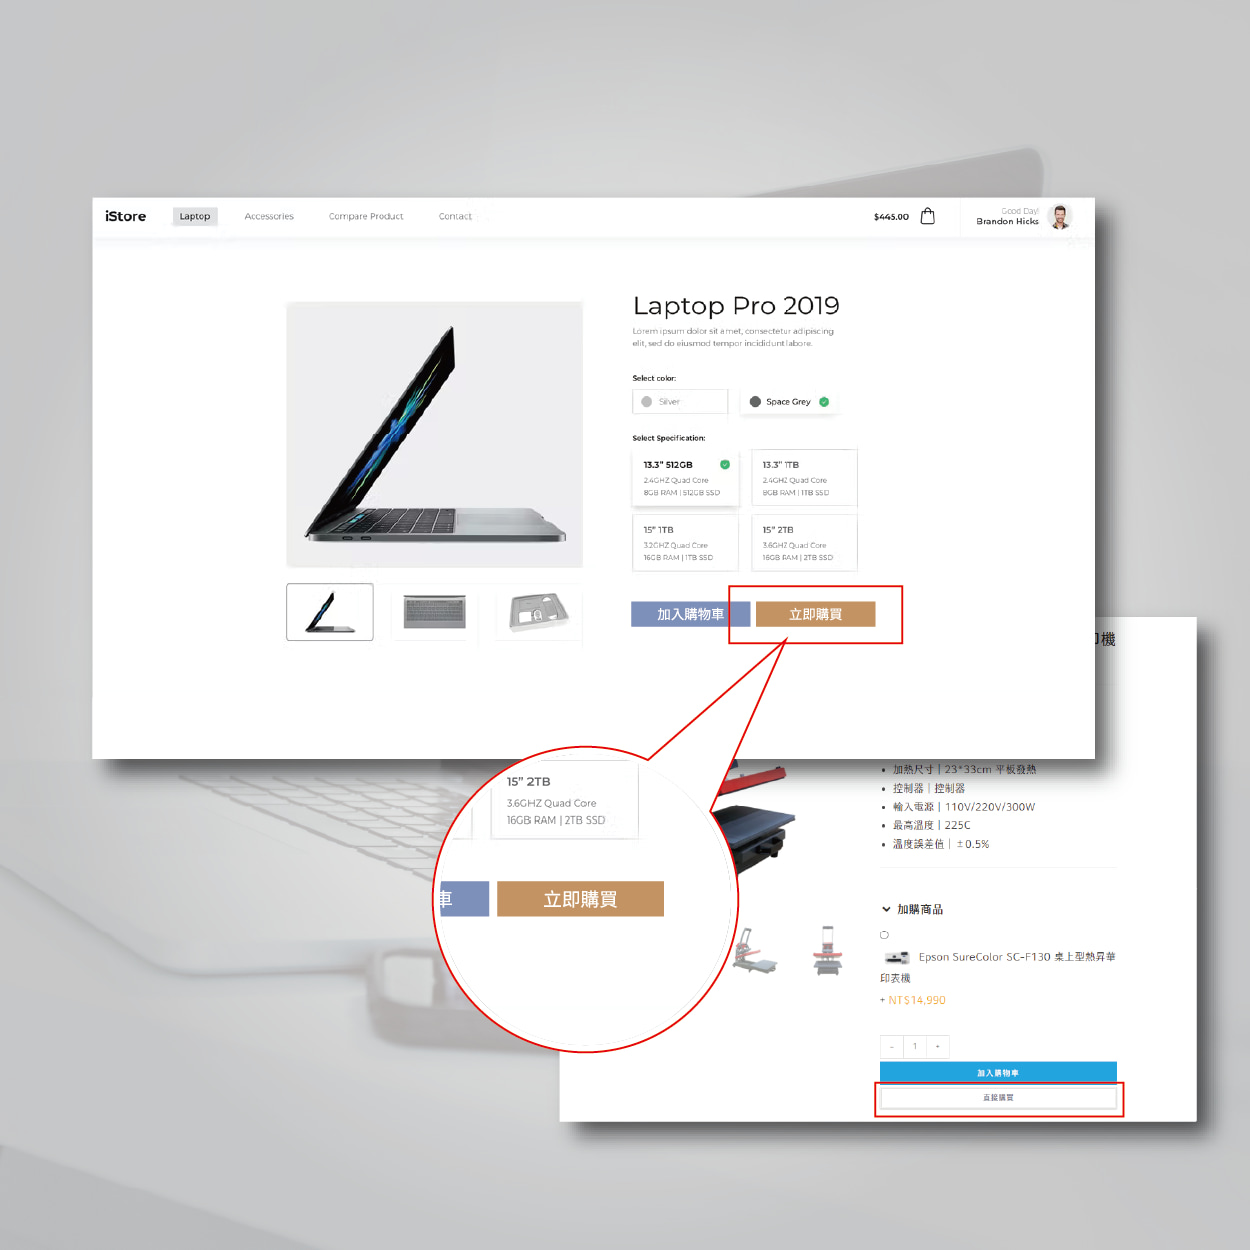 Quick View and Buy Now For WooCommerce